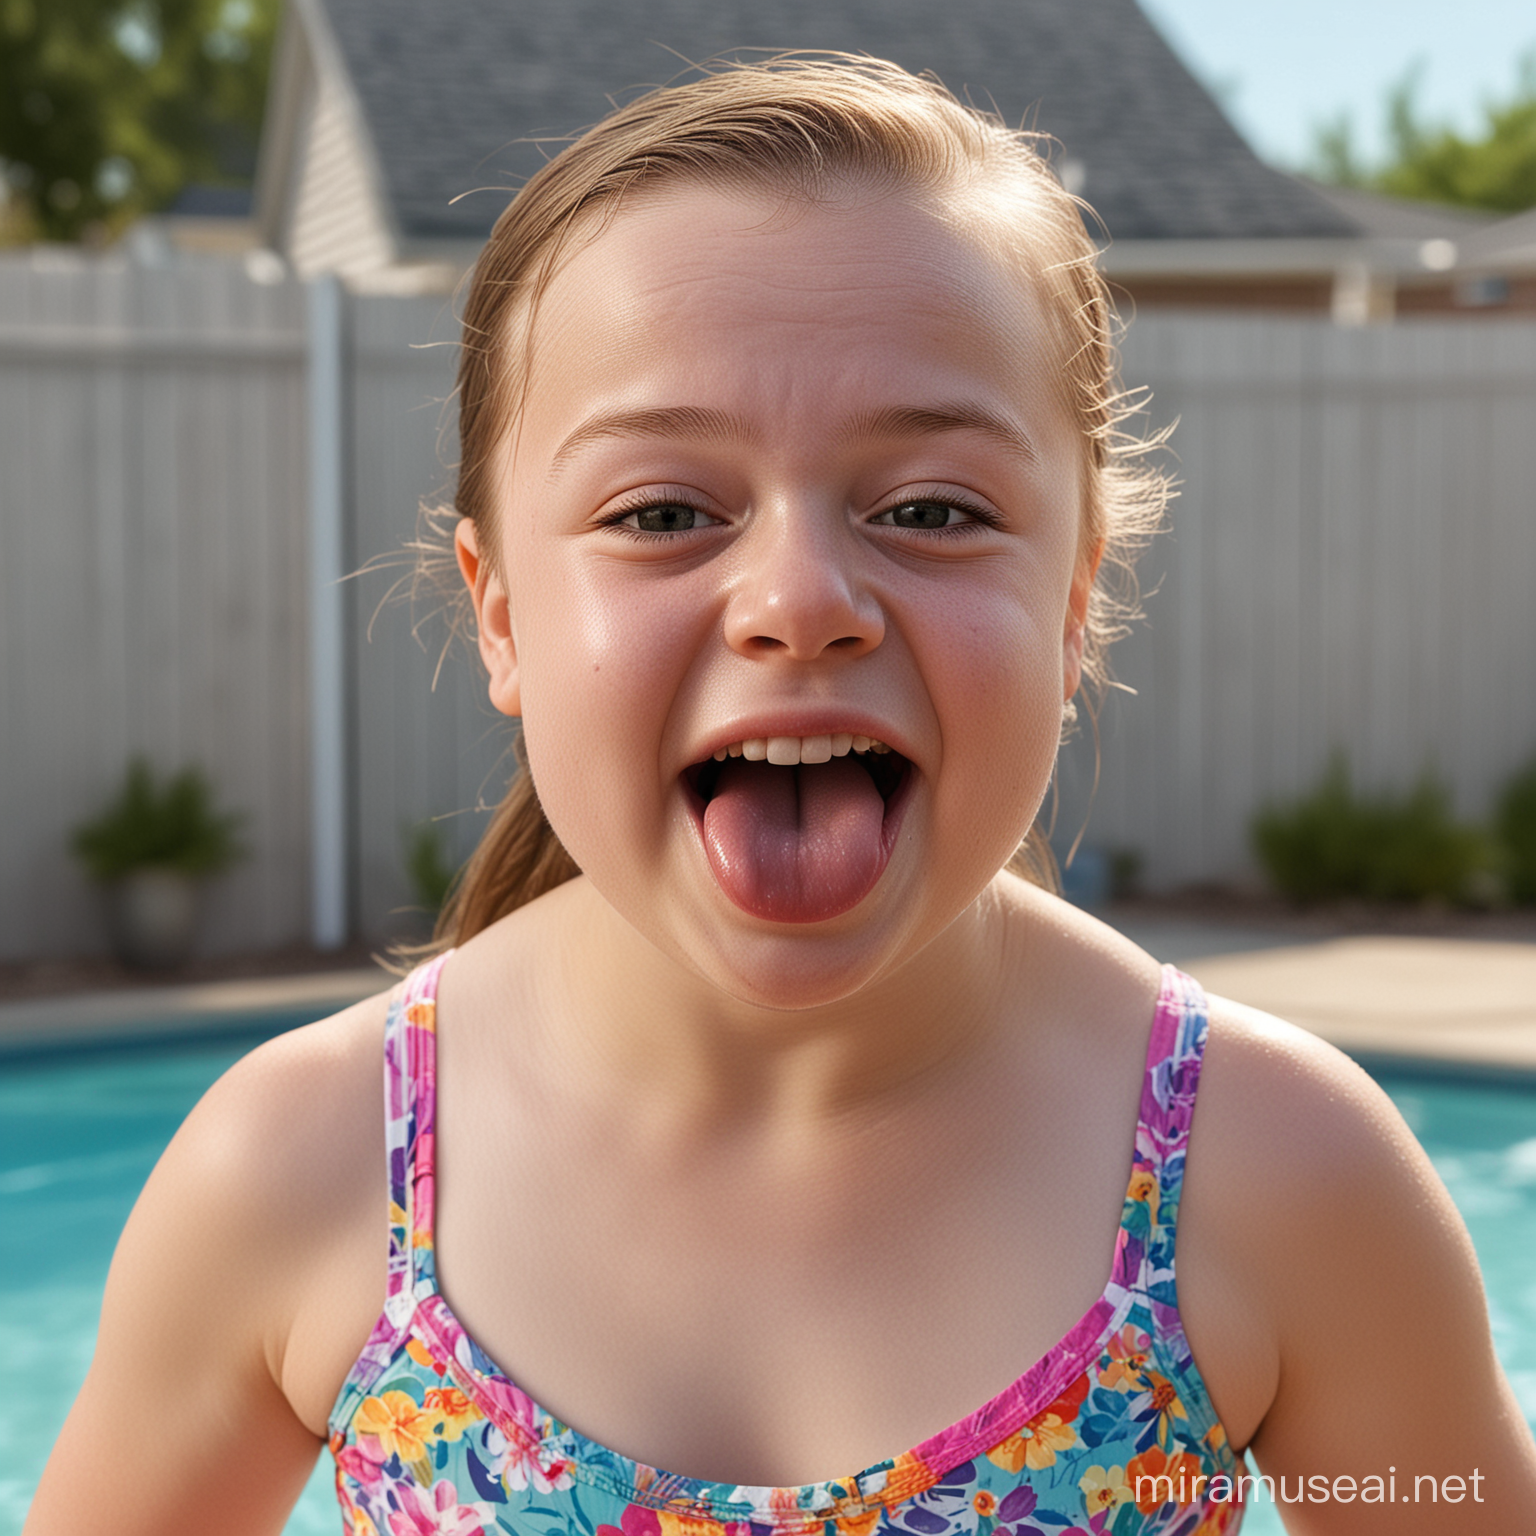 A photorealistic picture of an 11year-old girl with down syndrome,whose face shows typical trisomy 21 features and her tongue is slightly out of her mouth, she is wearing a swimsuit, she is in the yard,her face shows a disability,she must fully visible in the picture